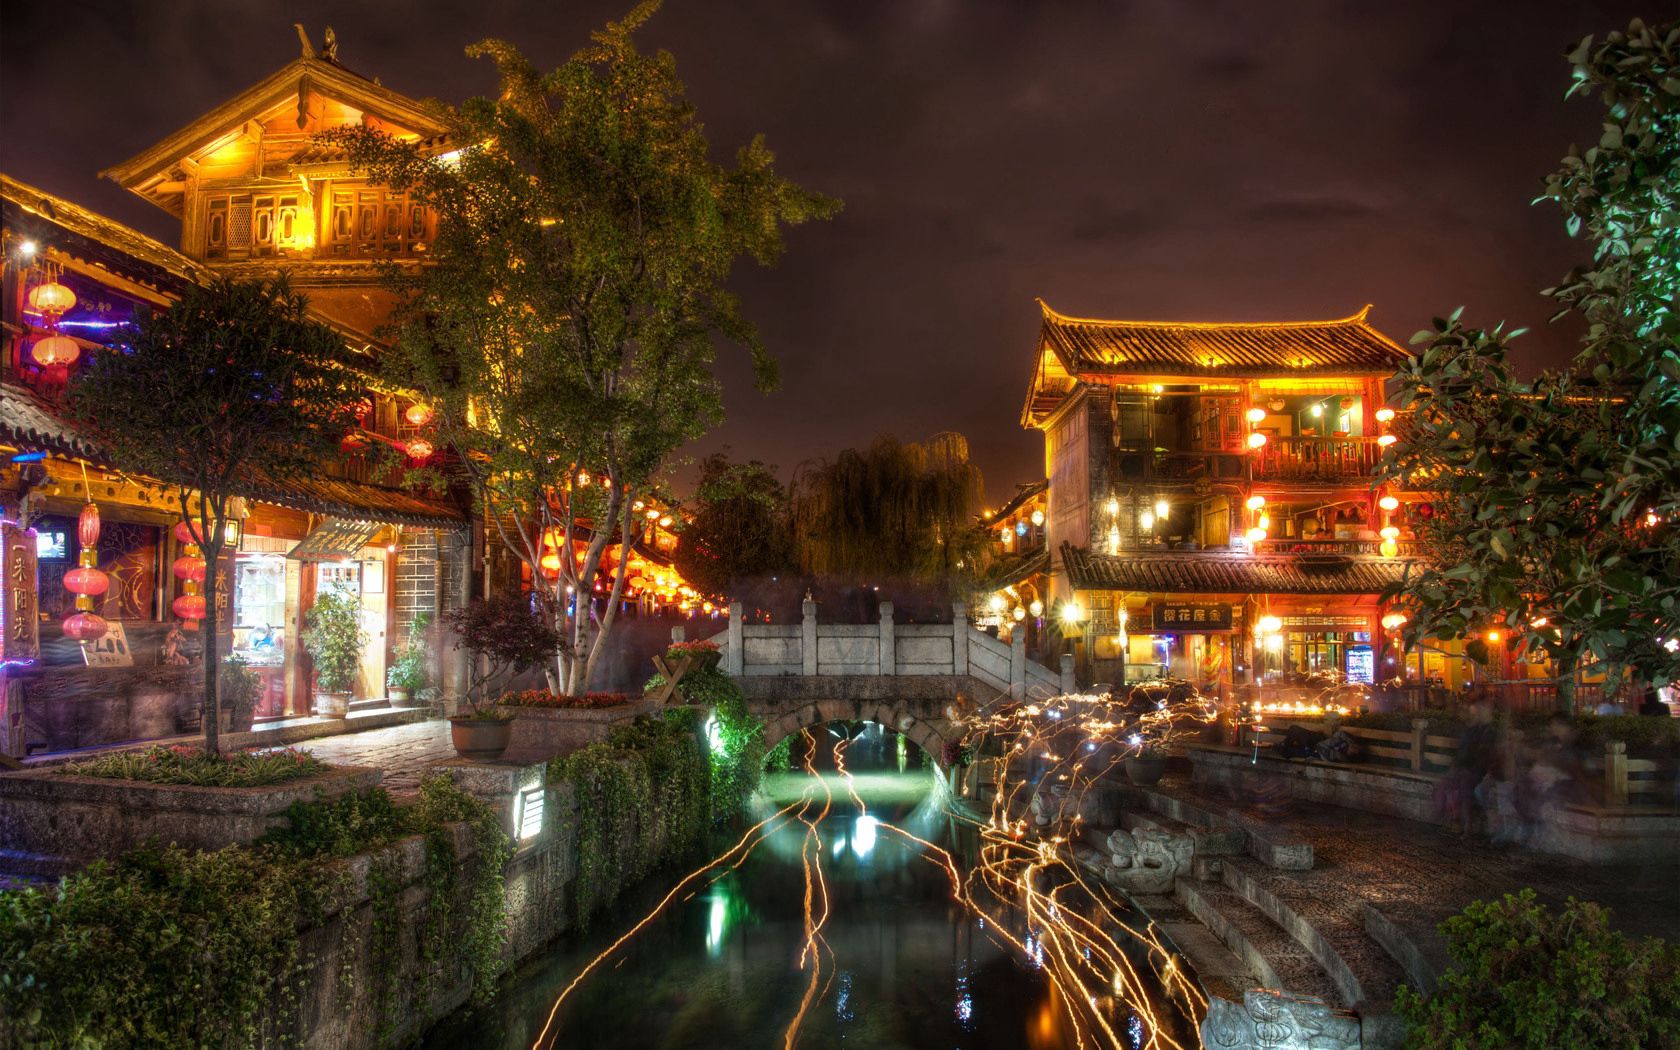 night, shine, landscape, cities, houses, light, ancient city, lijiang